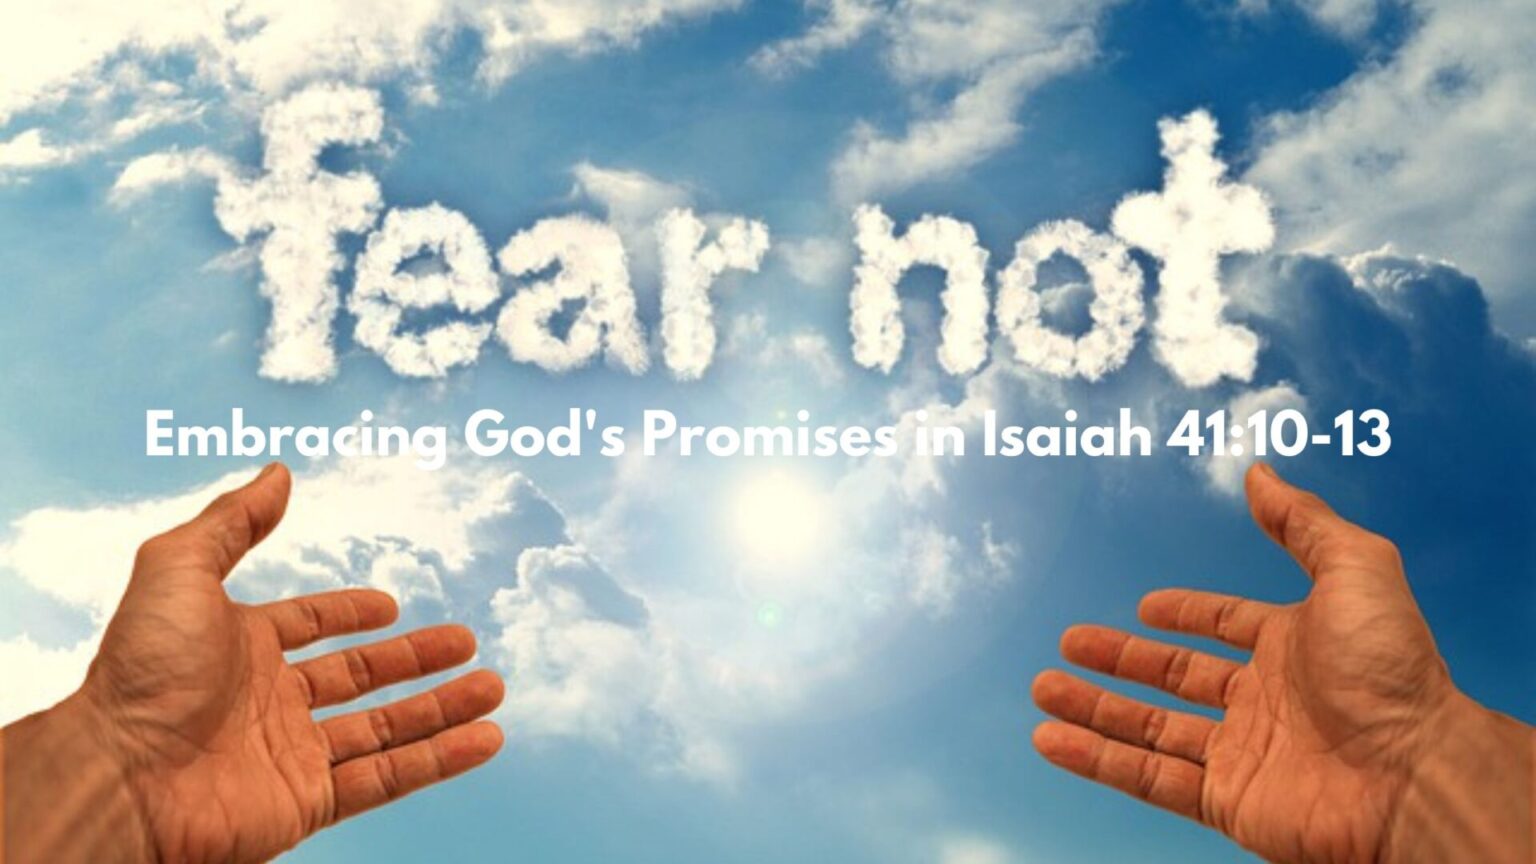 Fear Not: Embracing God's Promises in Isaiah 41:10-13